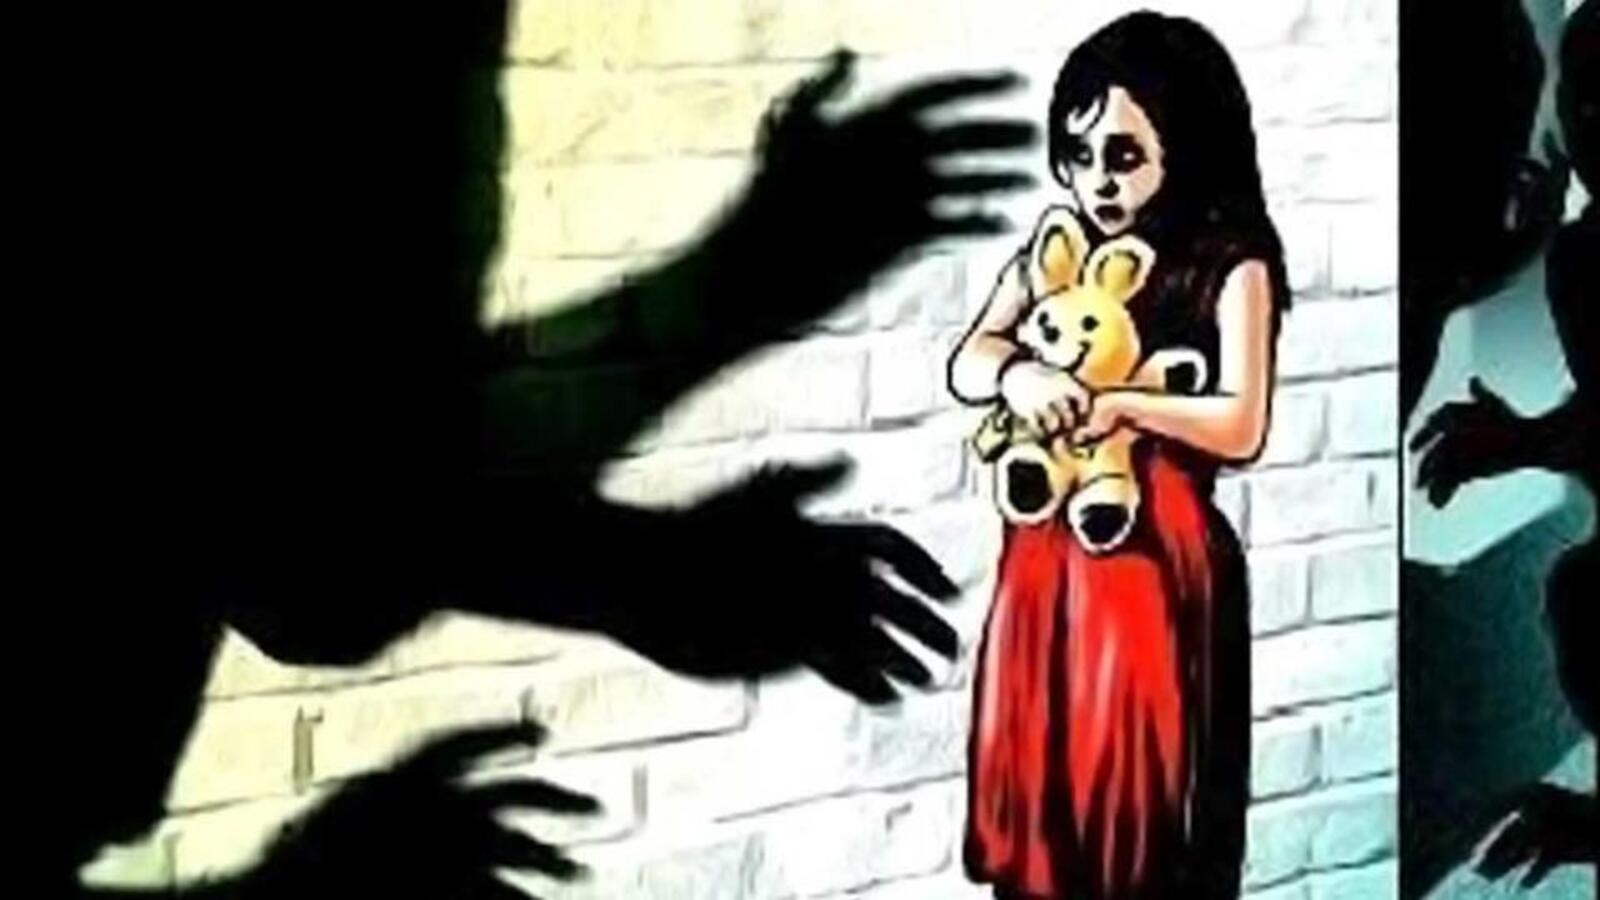 Assam: Gang rape accused killed in police encounter | Latest News India -  Hindustan Times